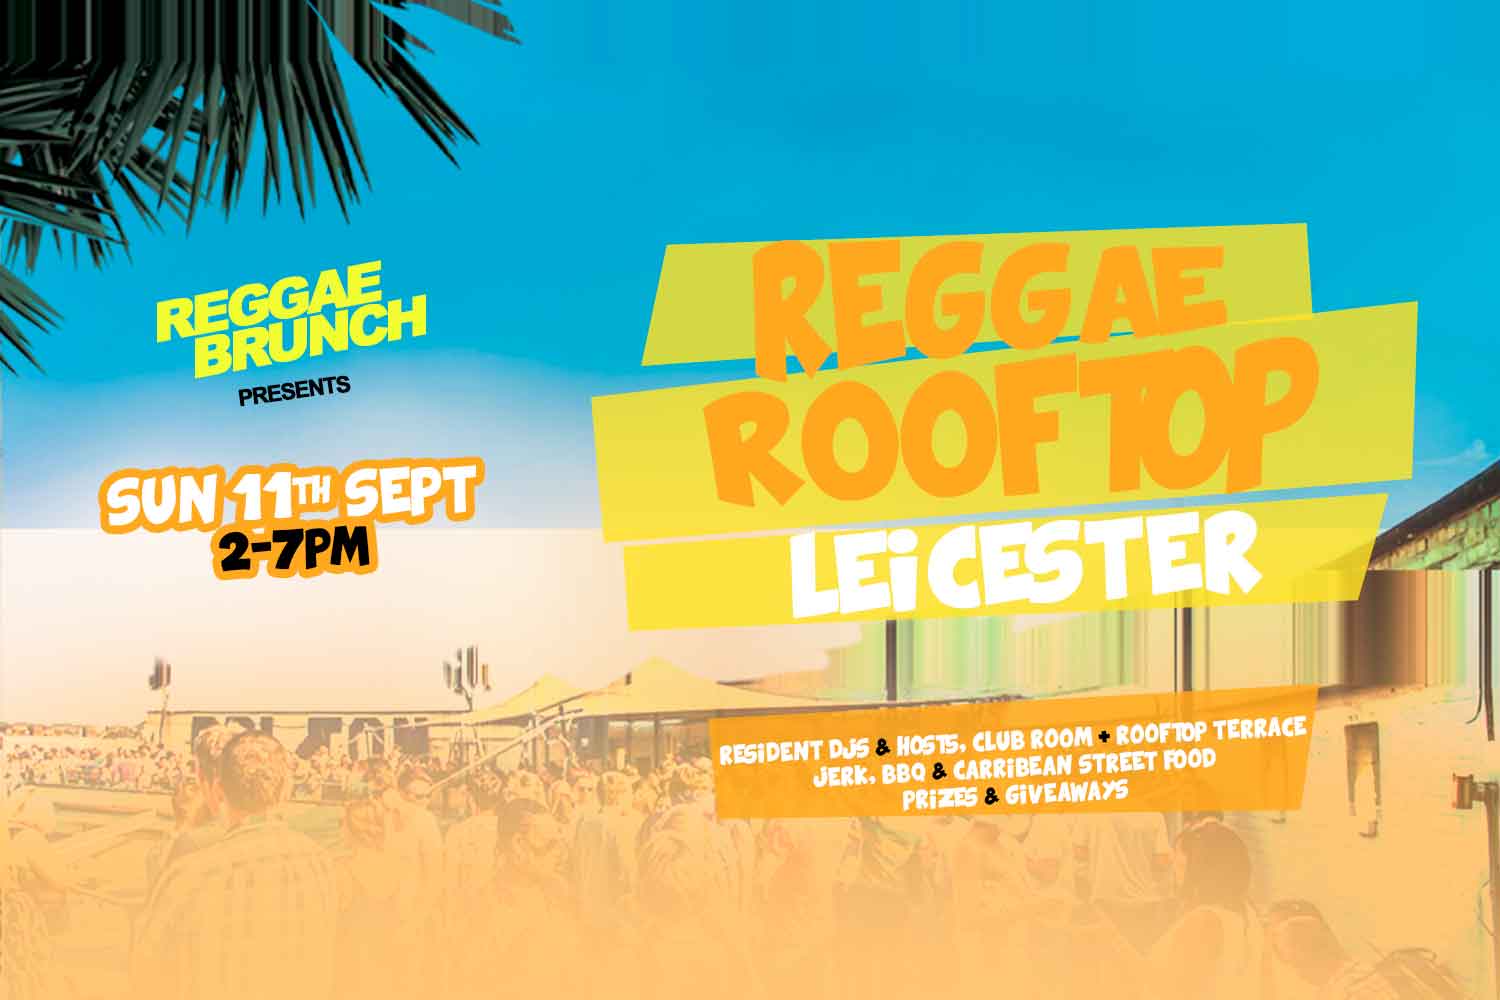 Sun, 11th Sept Leicester Rooftop